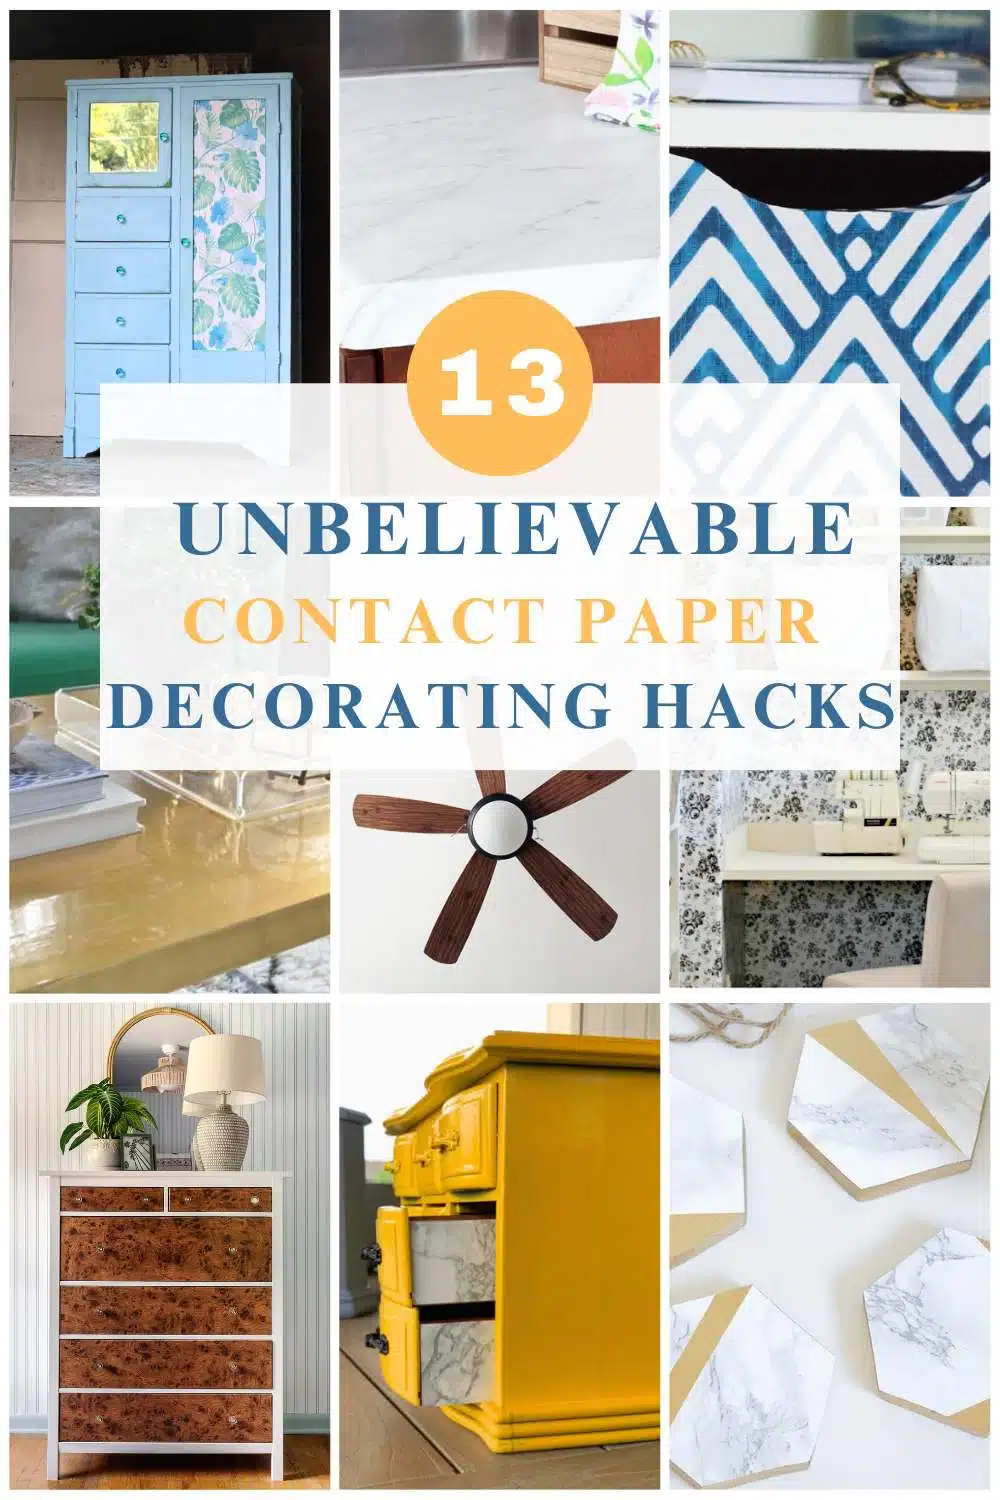 collage with 9 images of diy adhesive paper projects with text overlay